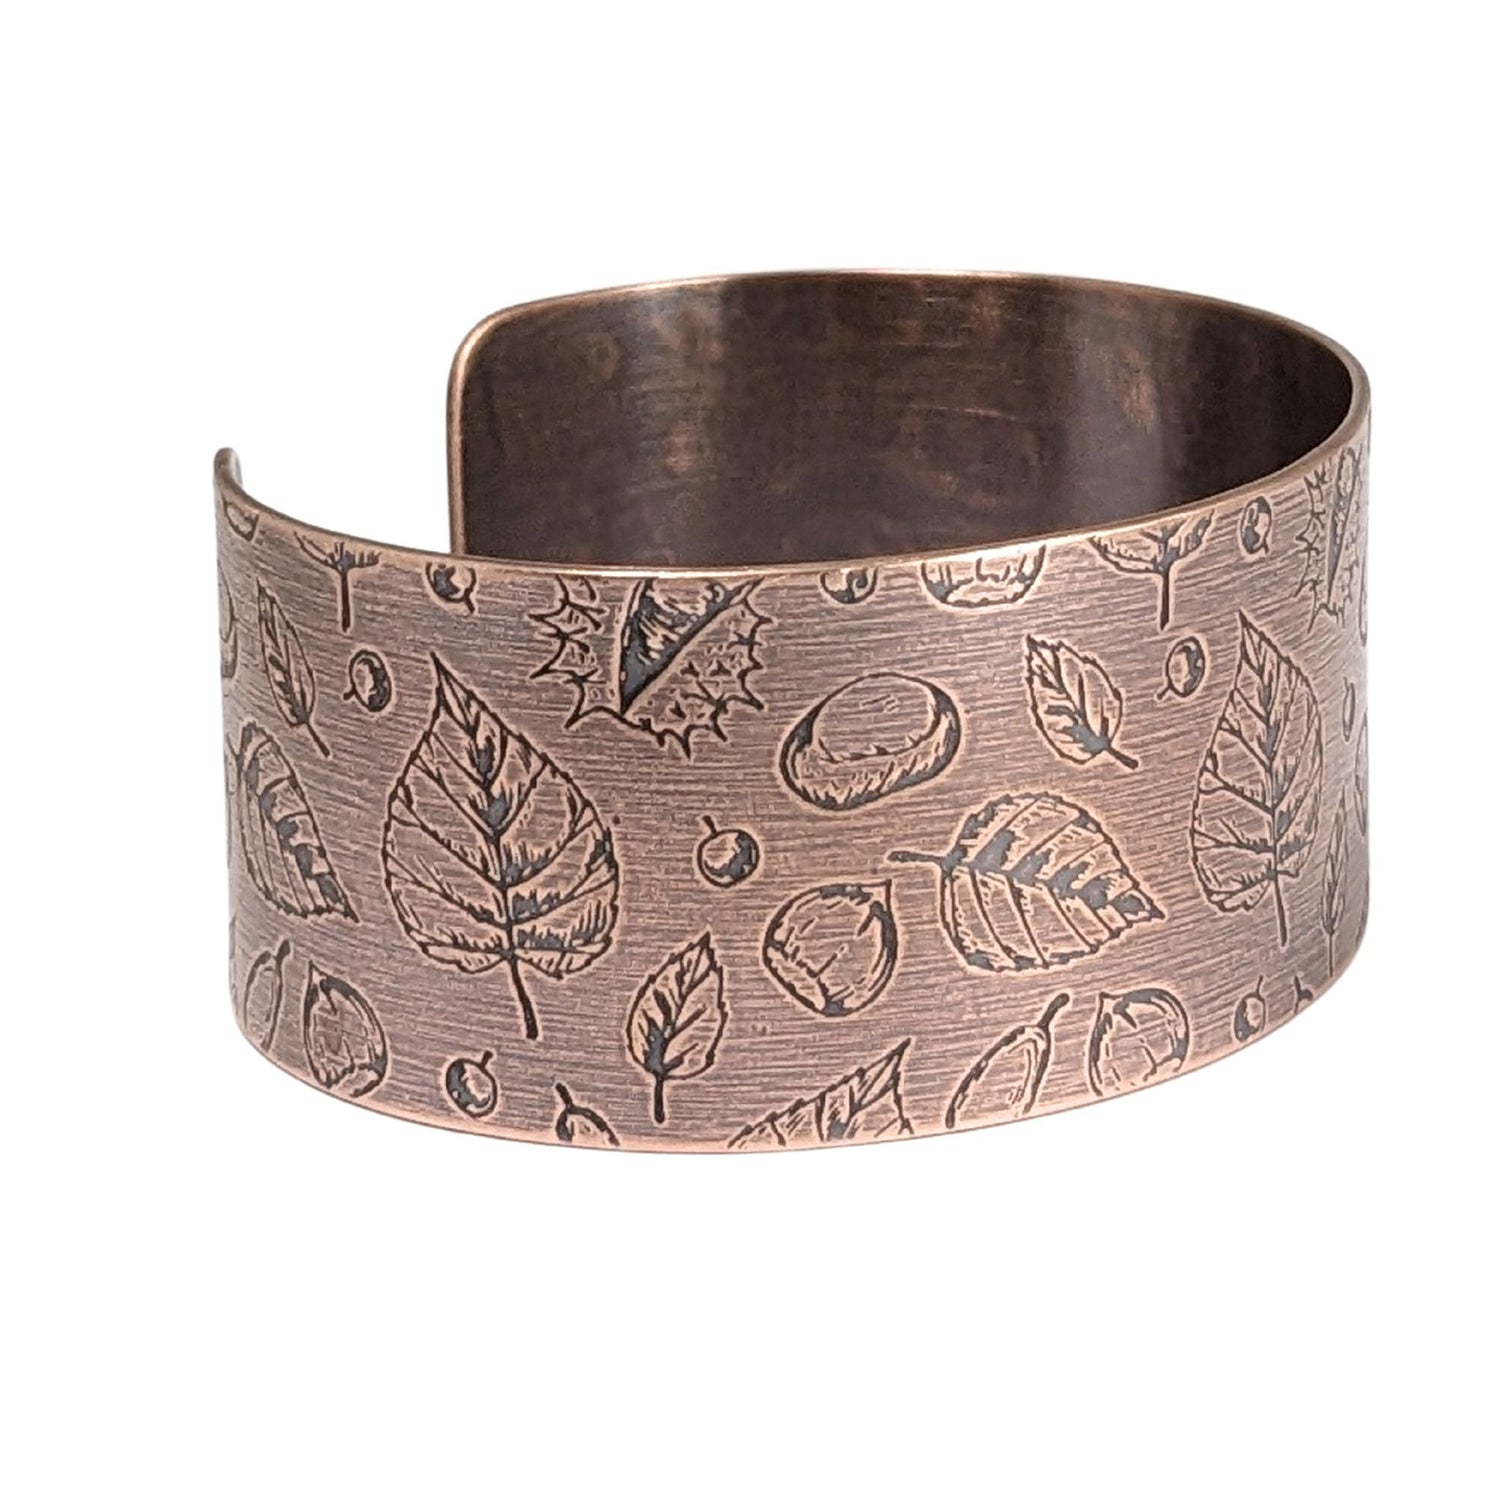 A copper cuff bracelet covered in a pattern of fall leaves and nuts